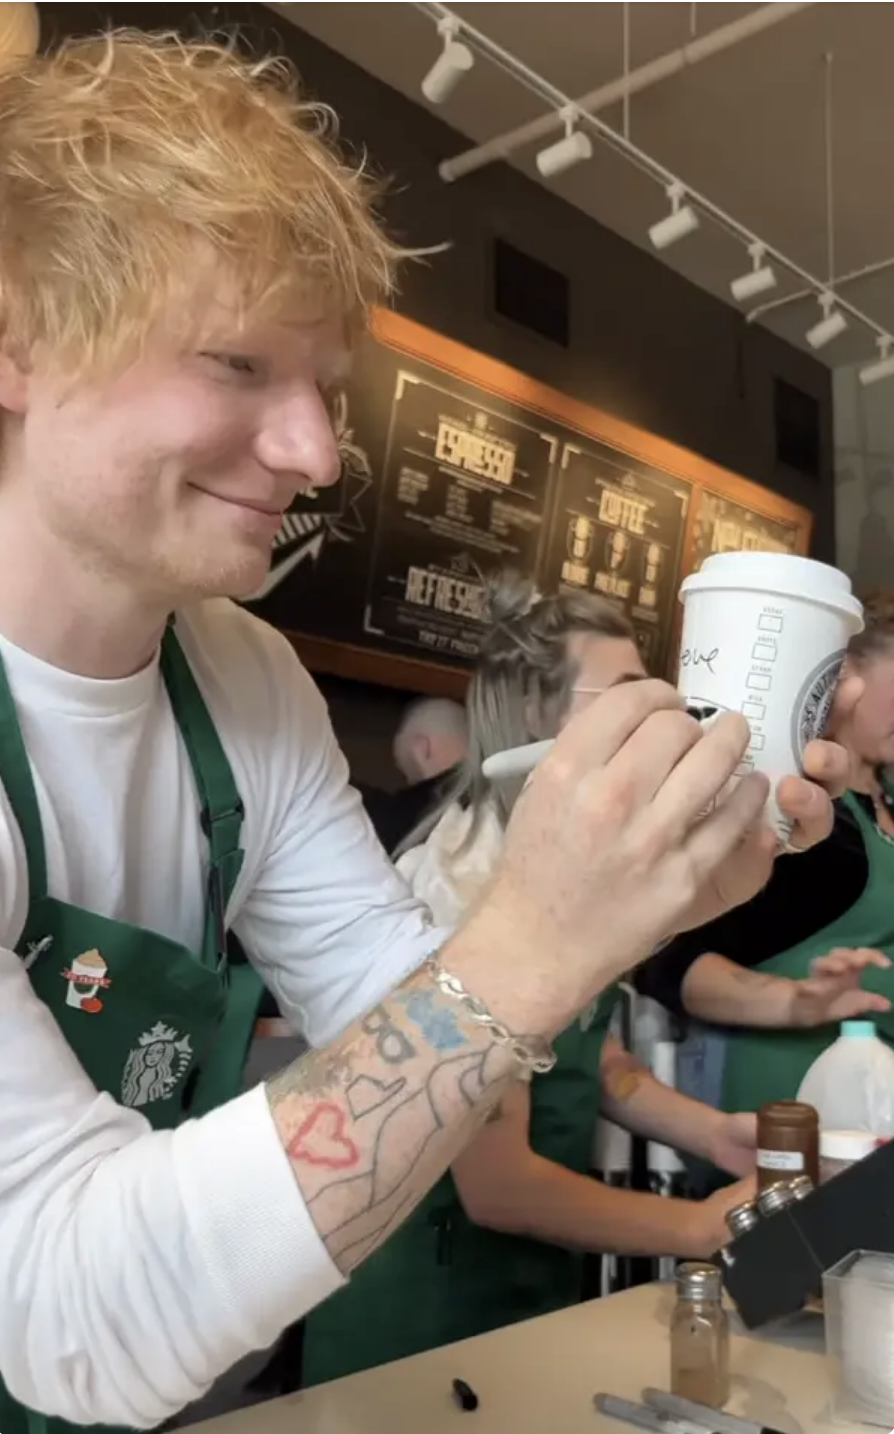 him in an apron writing a name on a coffee cup